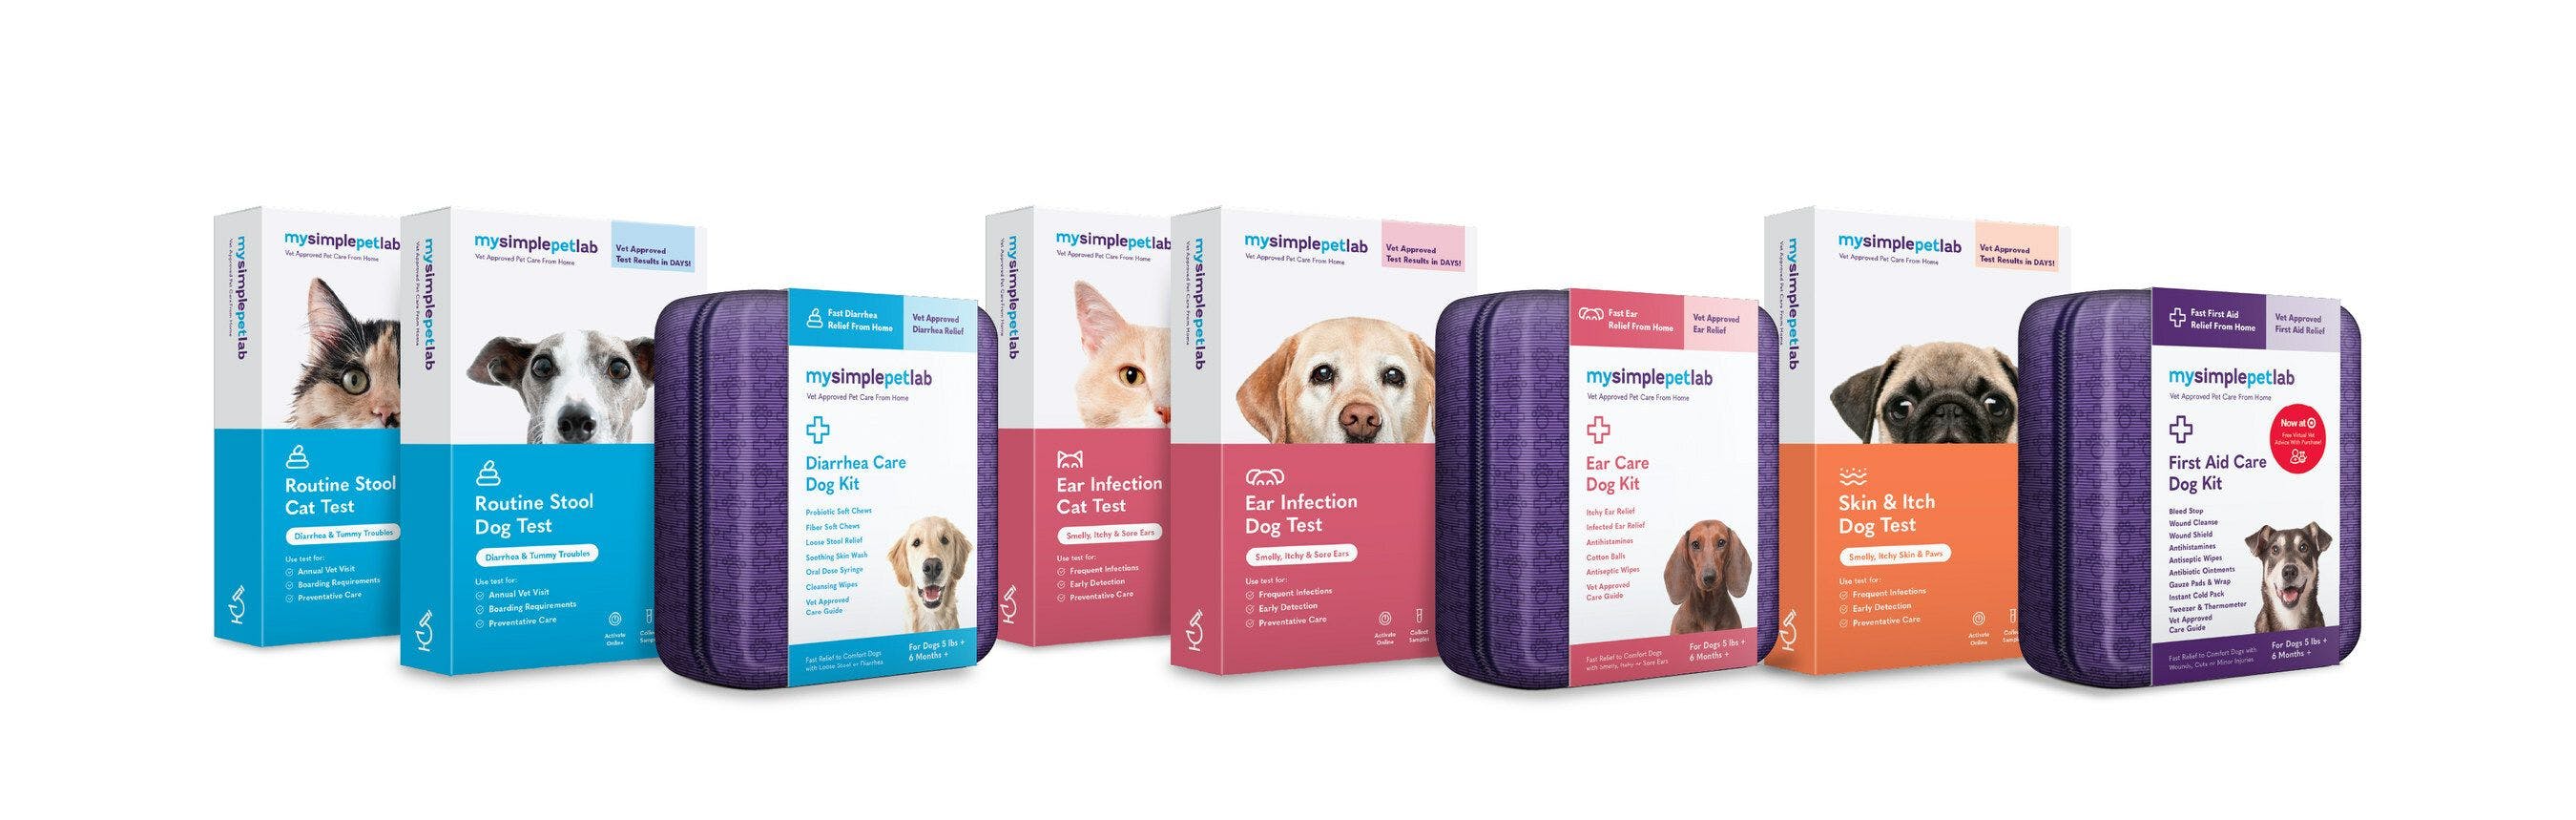 First Aid Care Dog Kits will soon be available in Targets nationwide